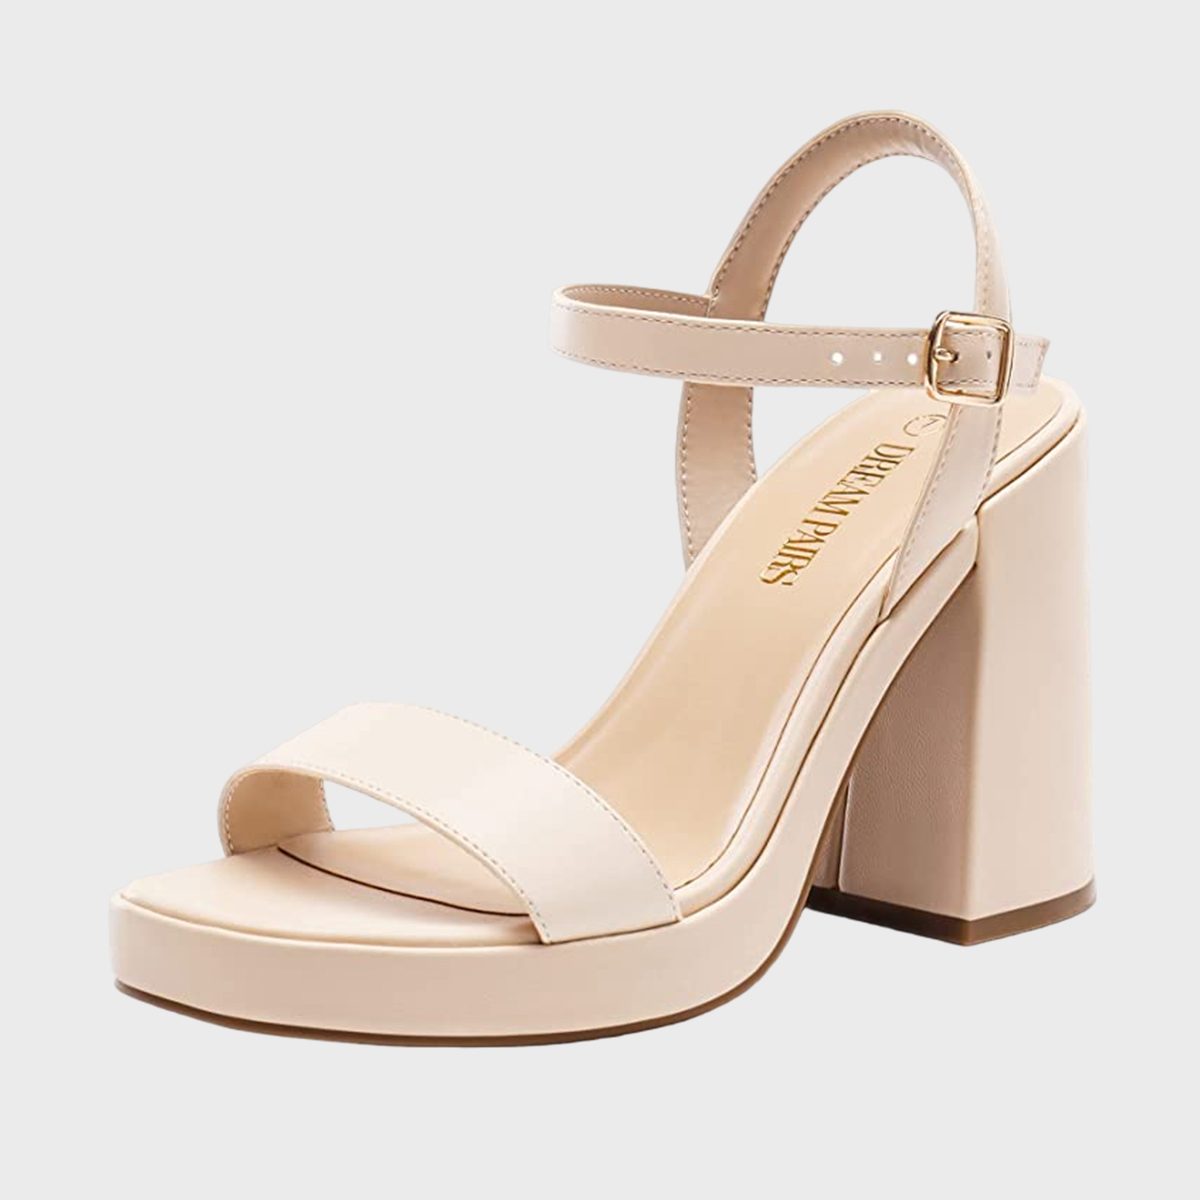 15 Summer Shoes for Women | Must-Buys from Amazon